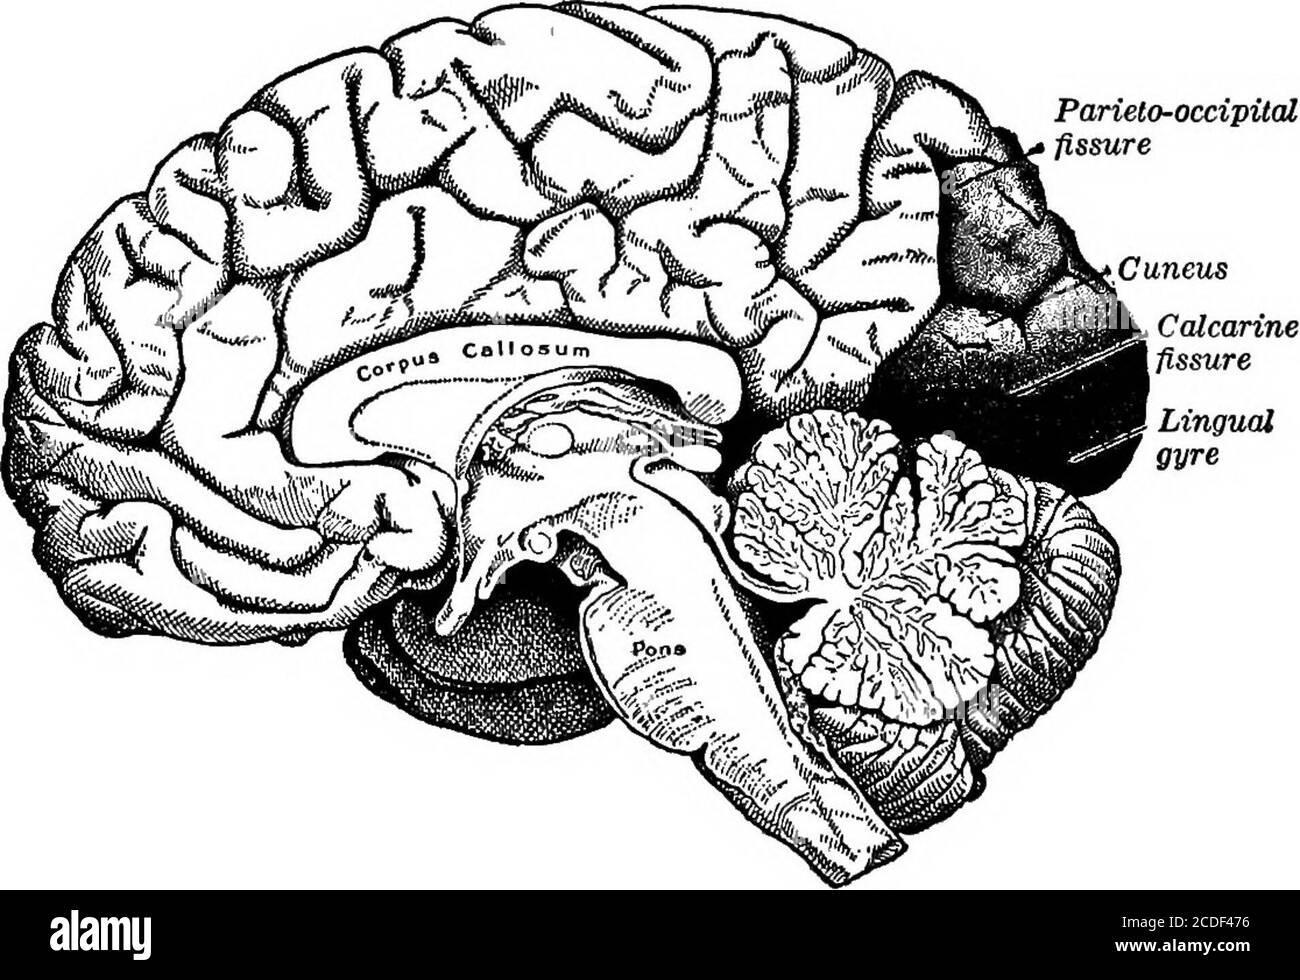 . Elements of physiological psychology; a treatise of the activities and nature of the mind, from the physical and experimental points of view . it., p. 636. The myelinization method has not yet excluded the precentral gyre from be-ing part of the receiving station; and the inner structure of the precentral is insome important respects like that of known sensory centres. There is still achance that some sensory fibres lead directly to the motor area, • Ueber d. Furwtionen d. Grosshirnrinde (Berlin, 1881; 2d ed., 1890). THE VISUAL AREA 247 latum to the occipital lobe, and constituting the conti Stock Photo